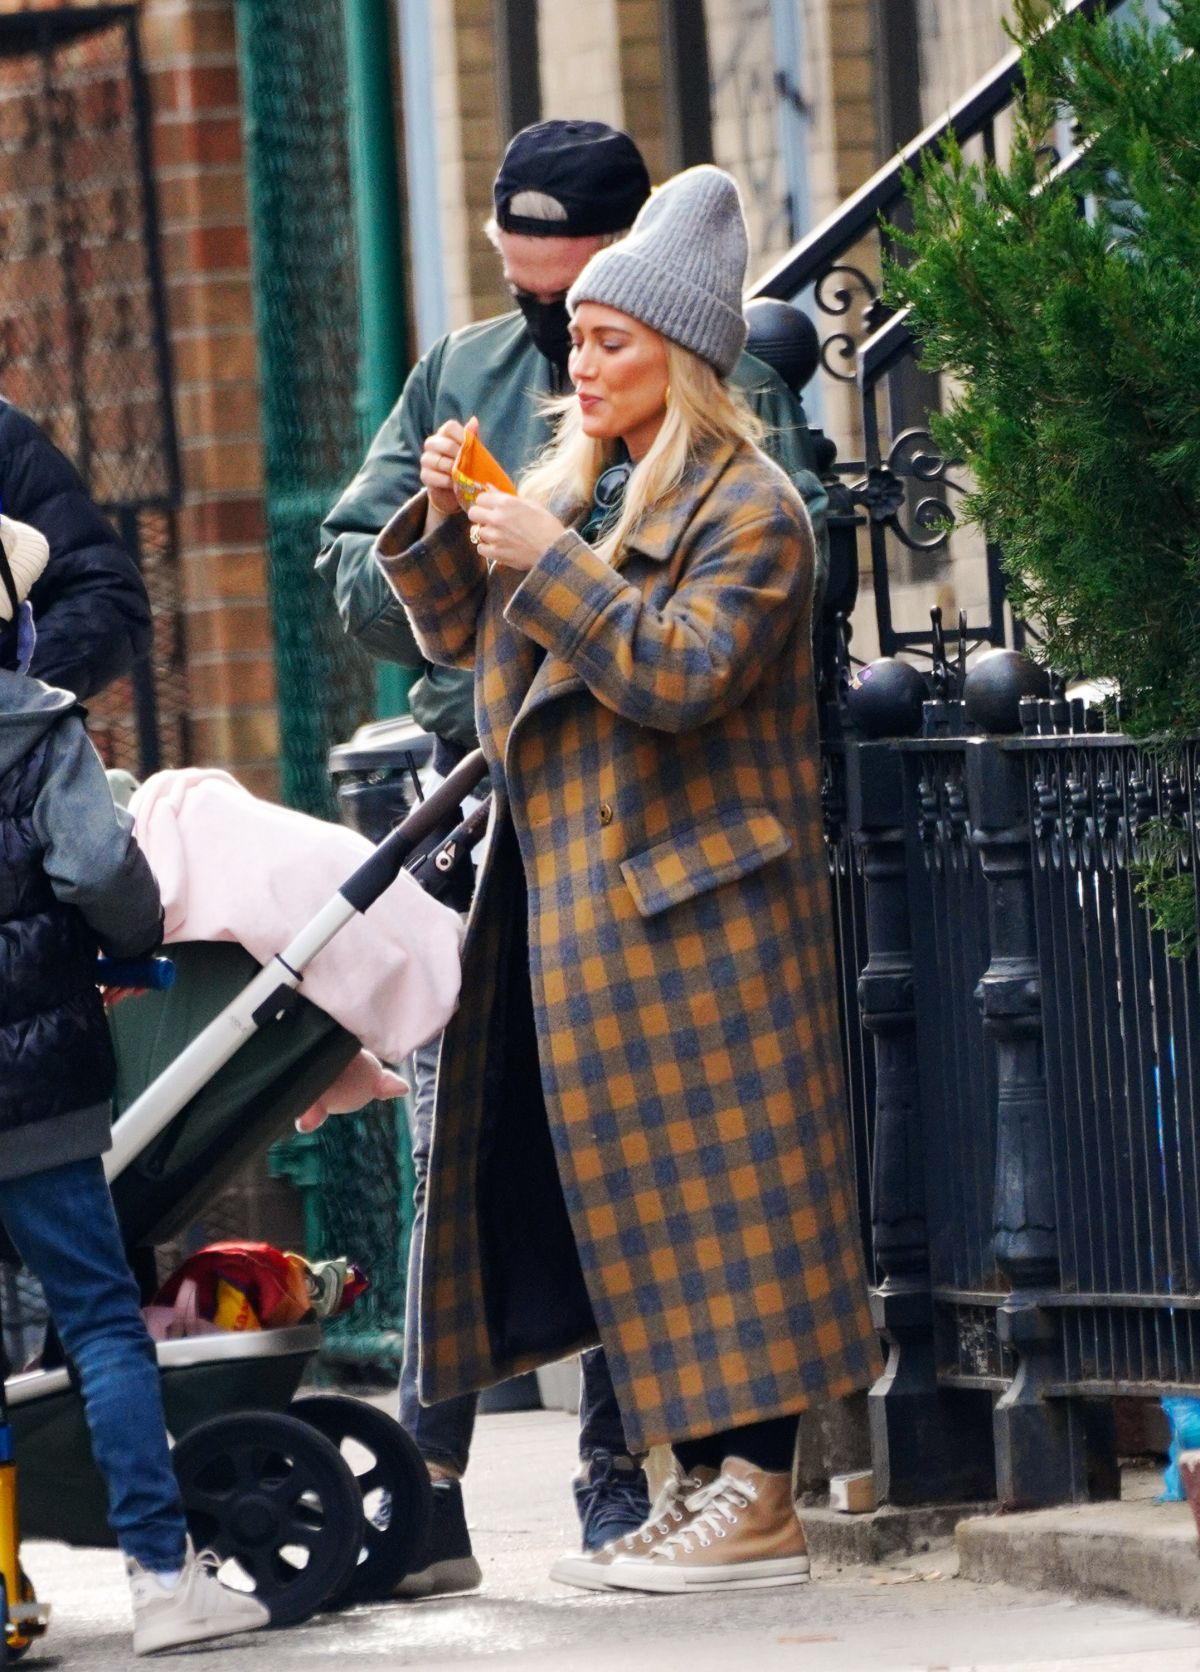 hilary-duff-out-and-about-in-new-york-11-28-2020-1.jpg